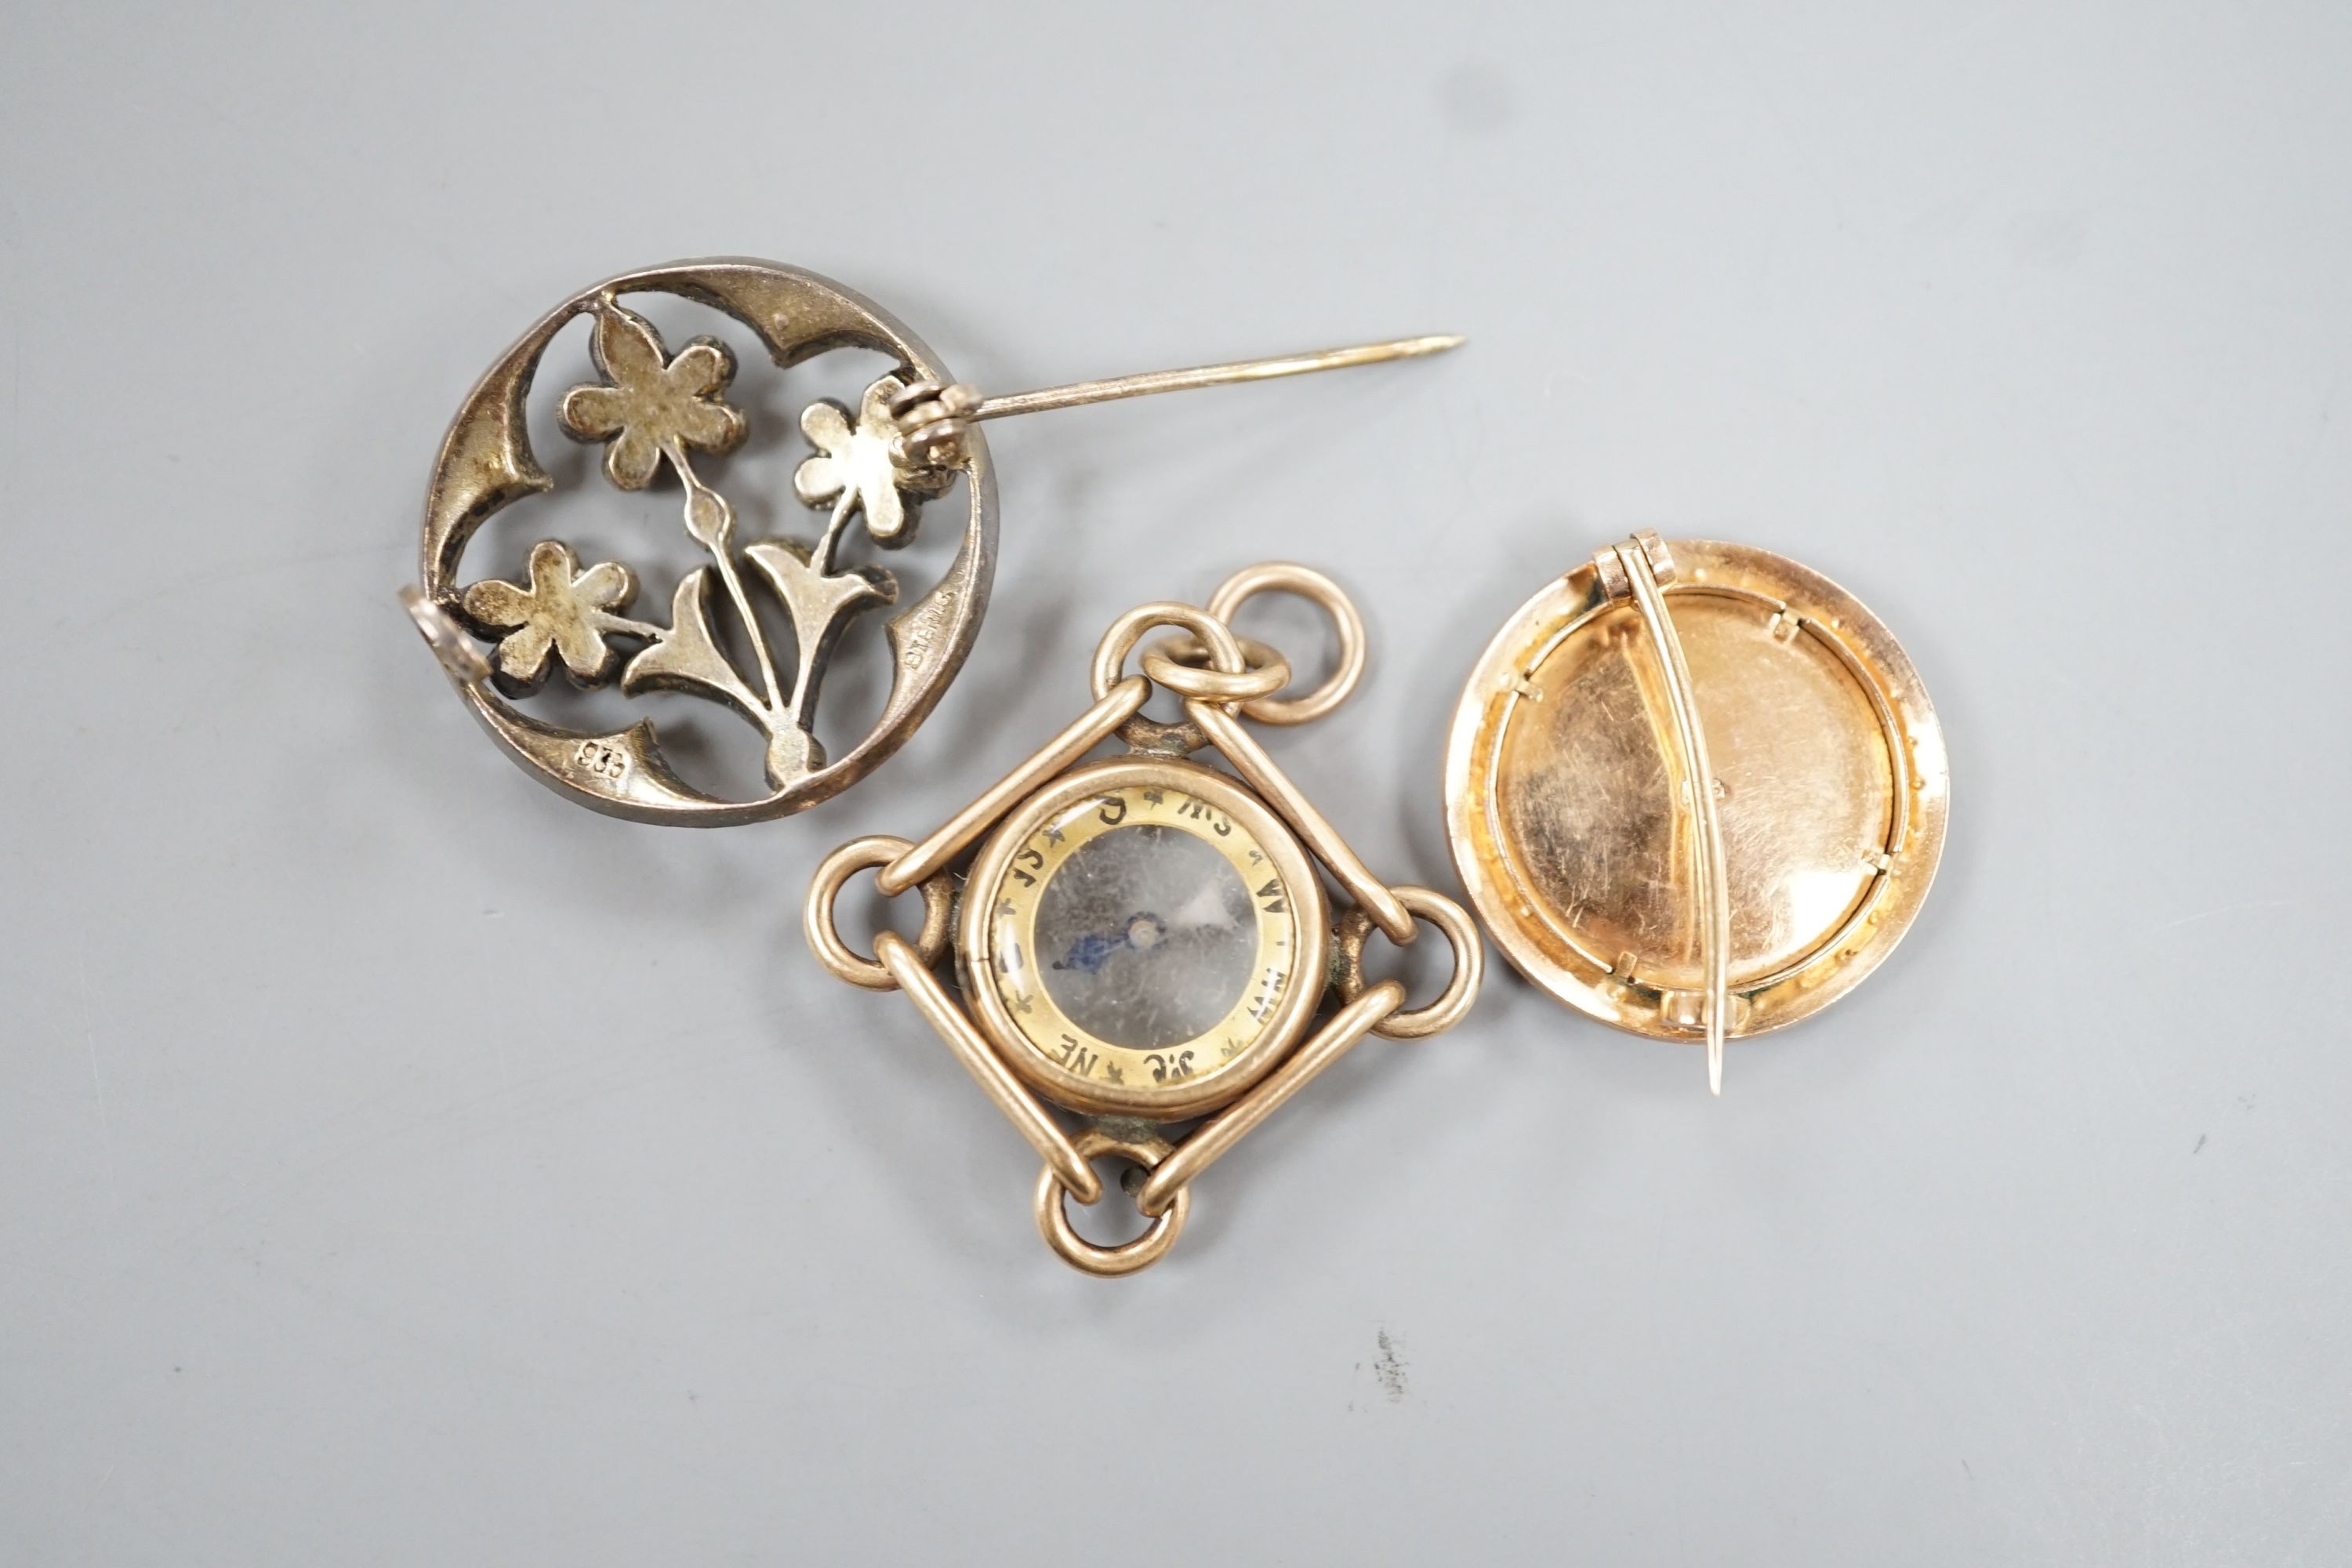 An American 10k yellow metal compass pendant, 29mm, gross 7.1 grams, a 585 and split pearl set circular portrait brooch, gross 4 grams and a two colour paste set brooch.